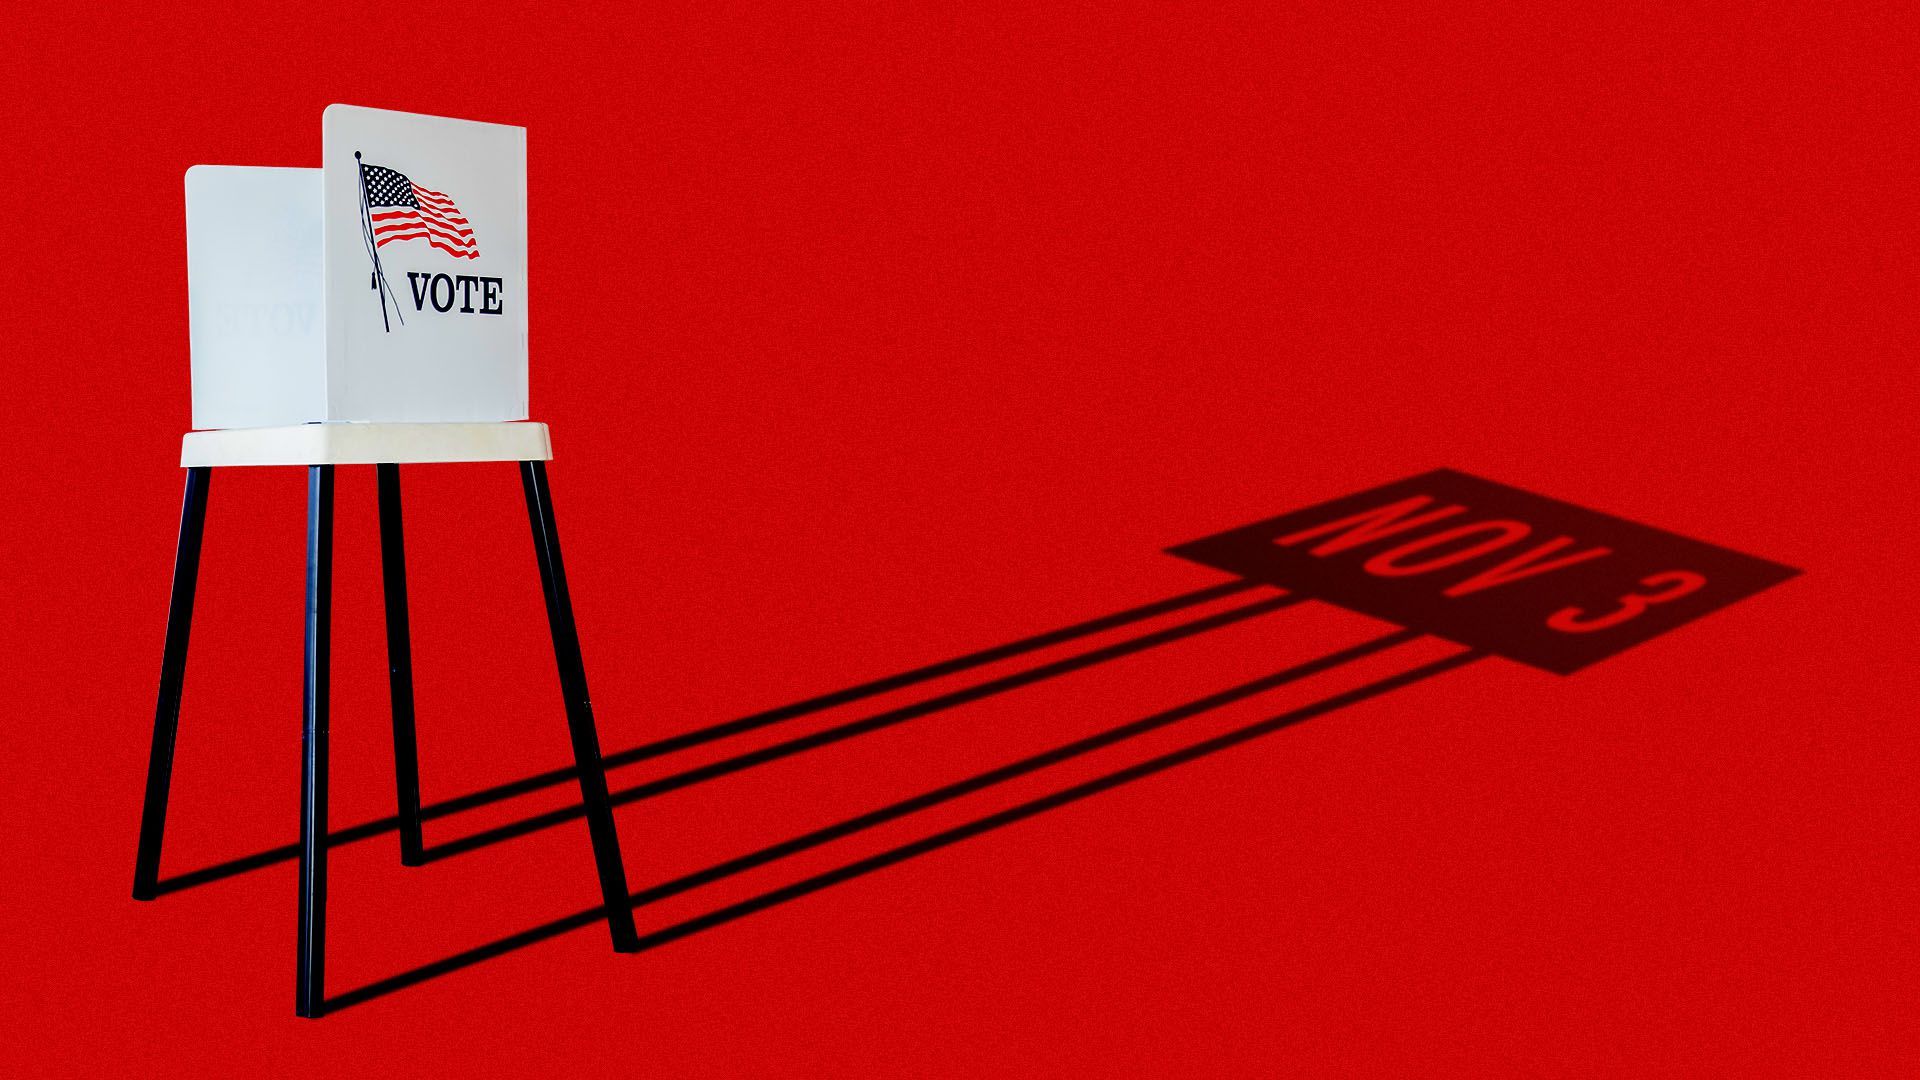 Illustration of a voting booth casting a shadow that reads "November 3rd"